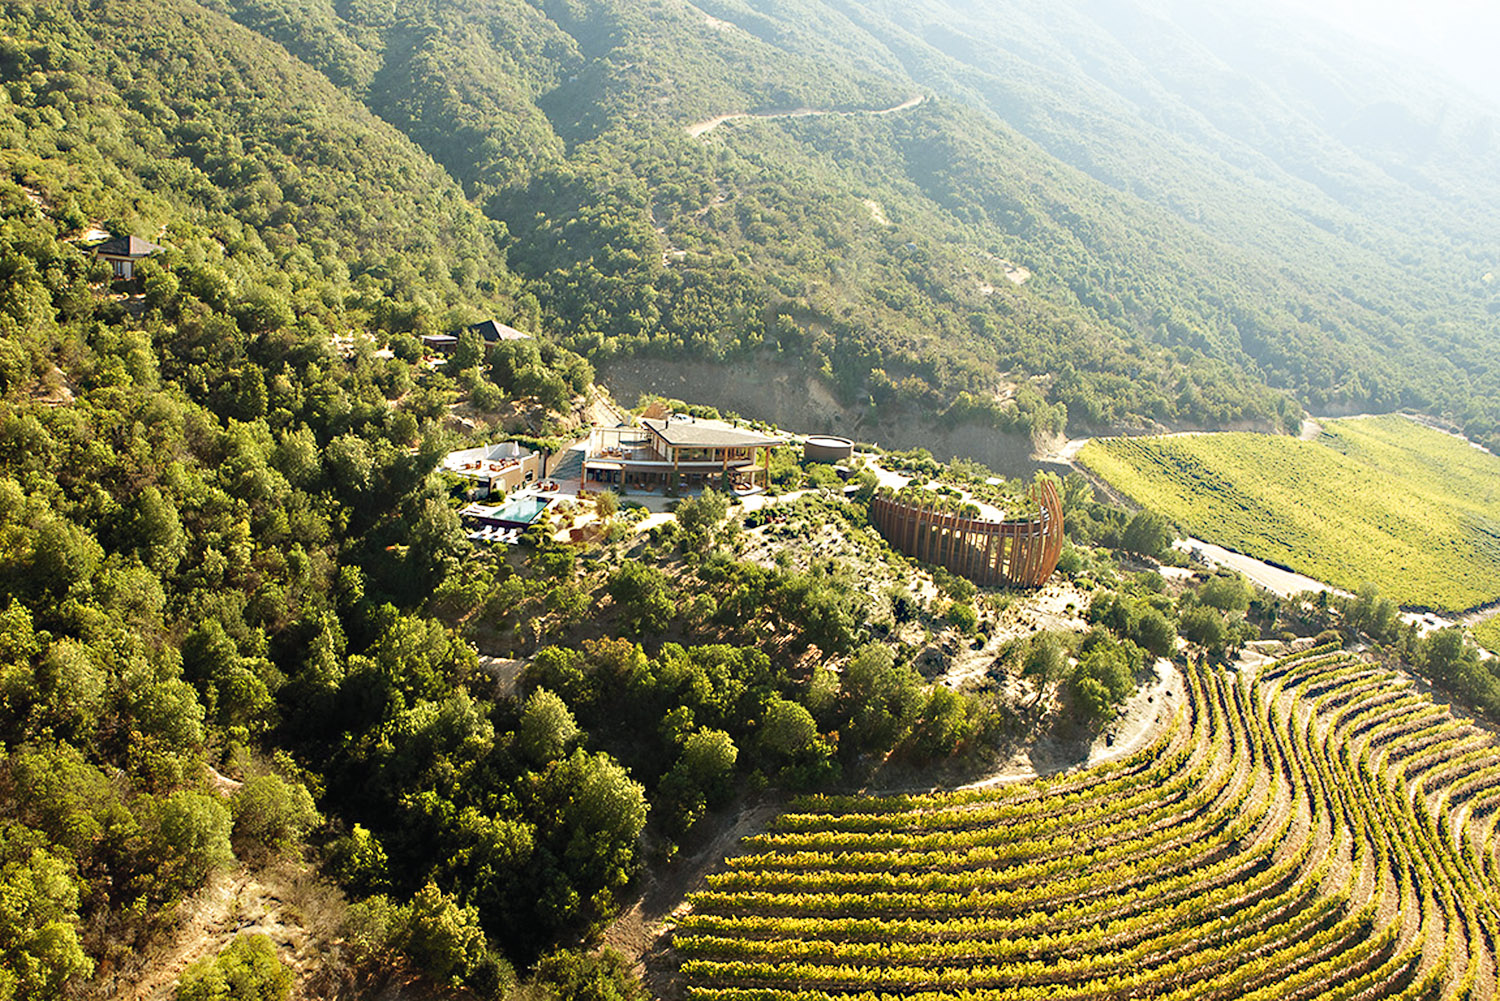 The verdant landscape of Colchagua Valley in Chile - home to the Lapostolle Residence.